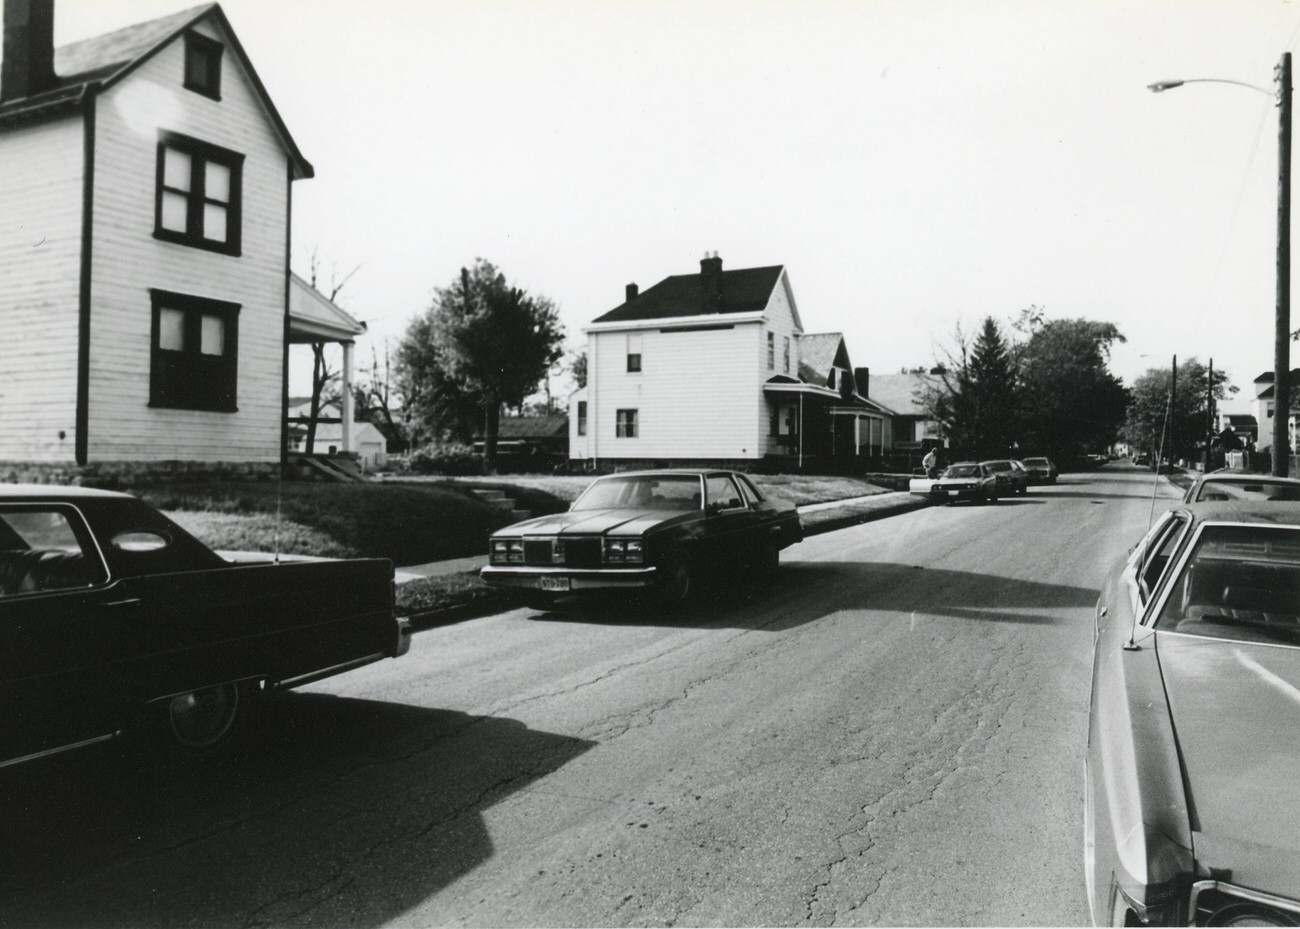 199 South Wheatland Avenue, highlighted in the Greater Hilltop Area Commission's Hilltop guide, 1980s.